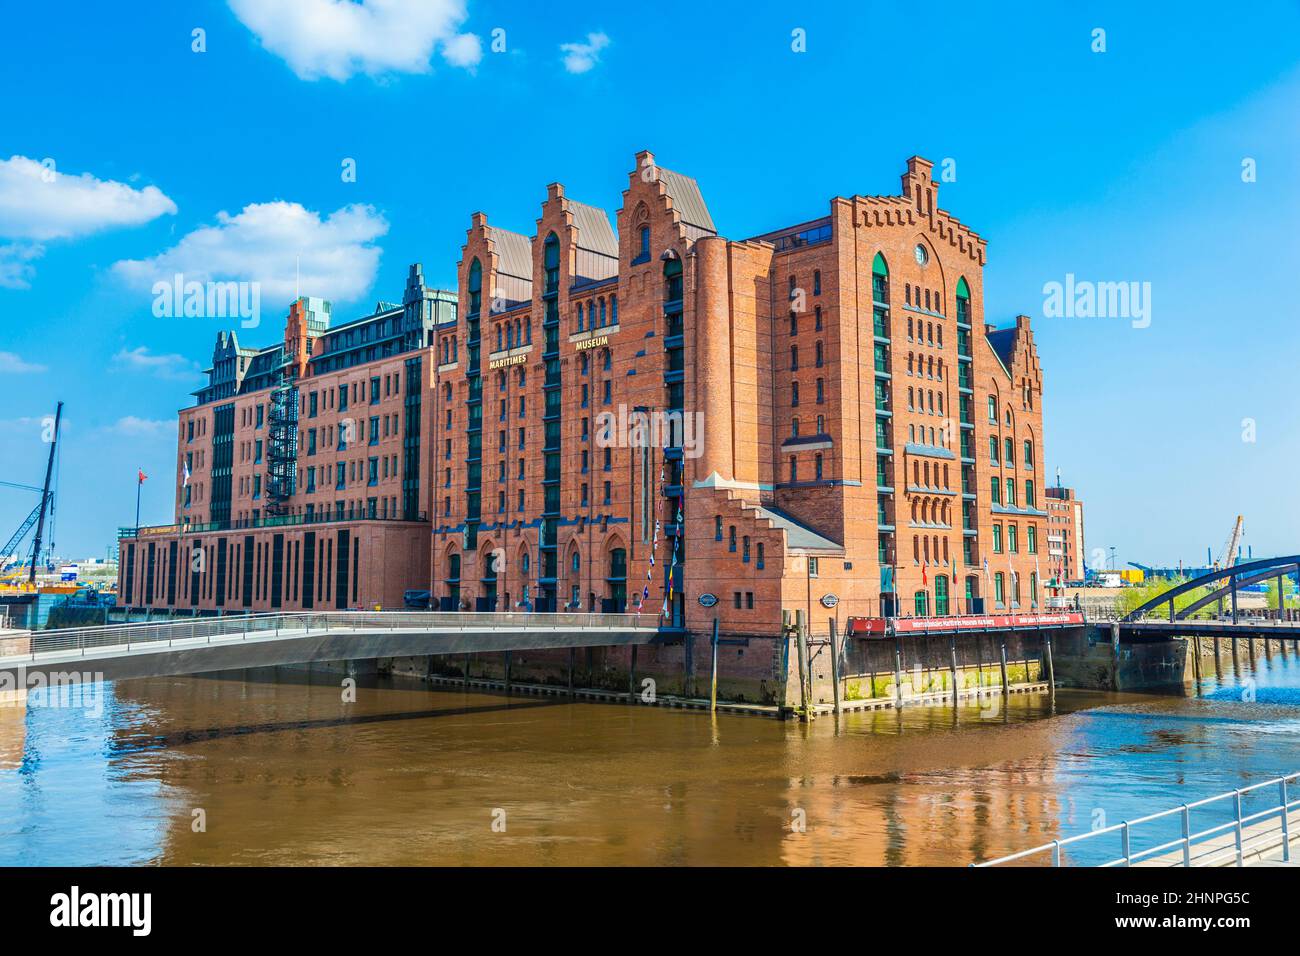 famous old Speicherstadt in Hamburg with the international maritime museum, an old brick building Stock Photo